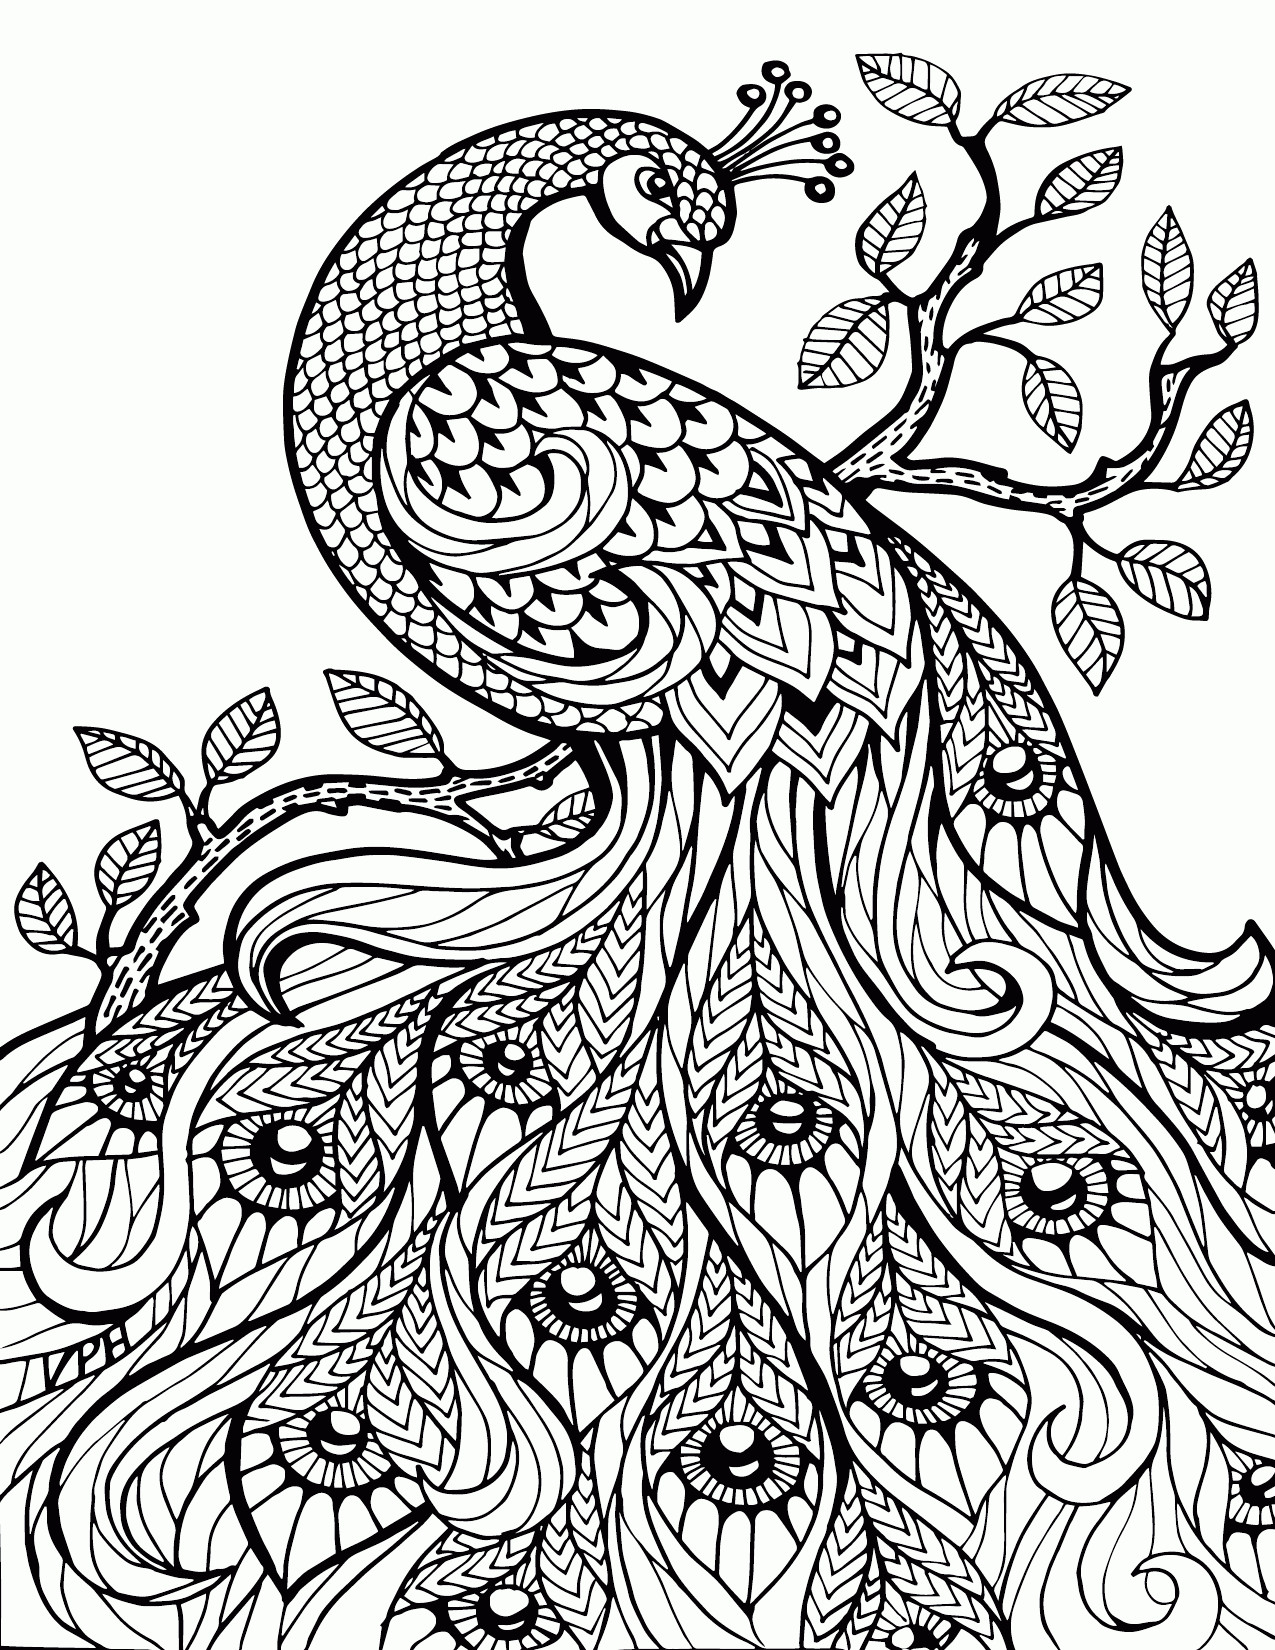 Stress Relief Printable Coloring Pages
 Adult Stress Relief Coloring Pages Printable Coloring